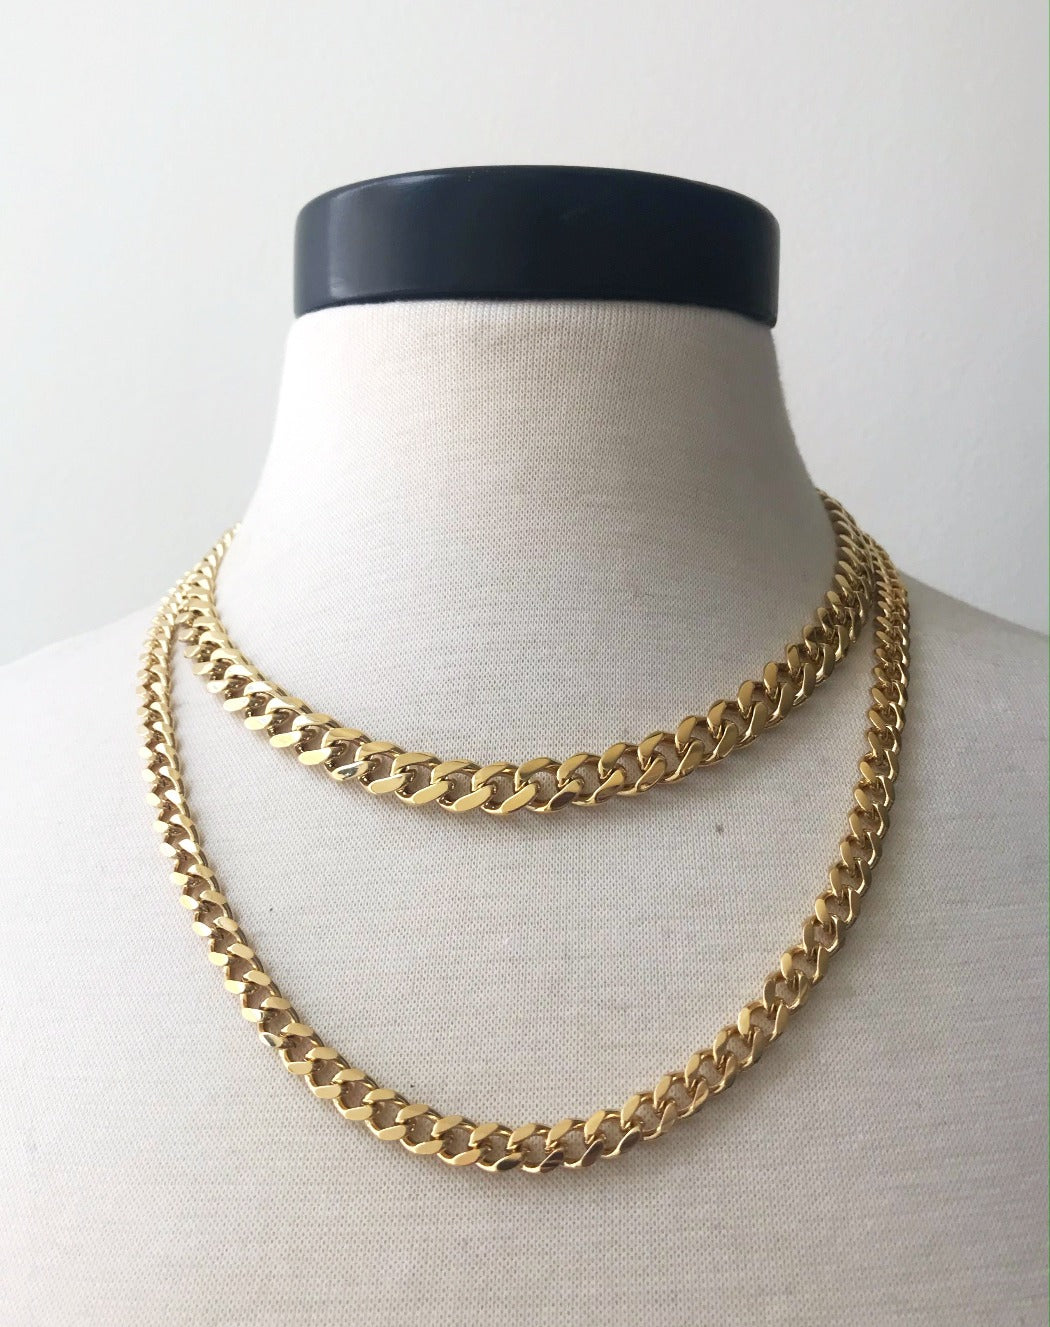 Rachel Mulherin basic gold layered curb chains on neck